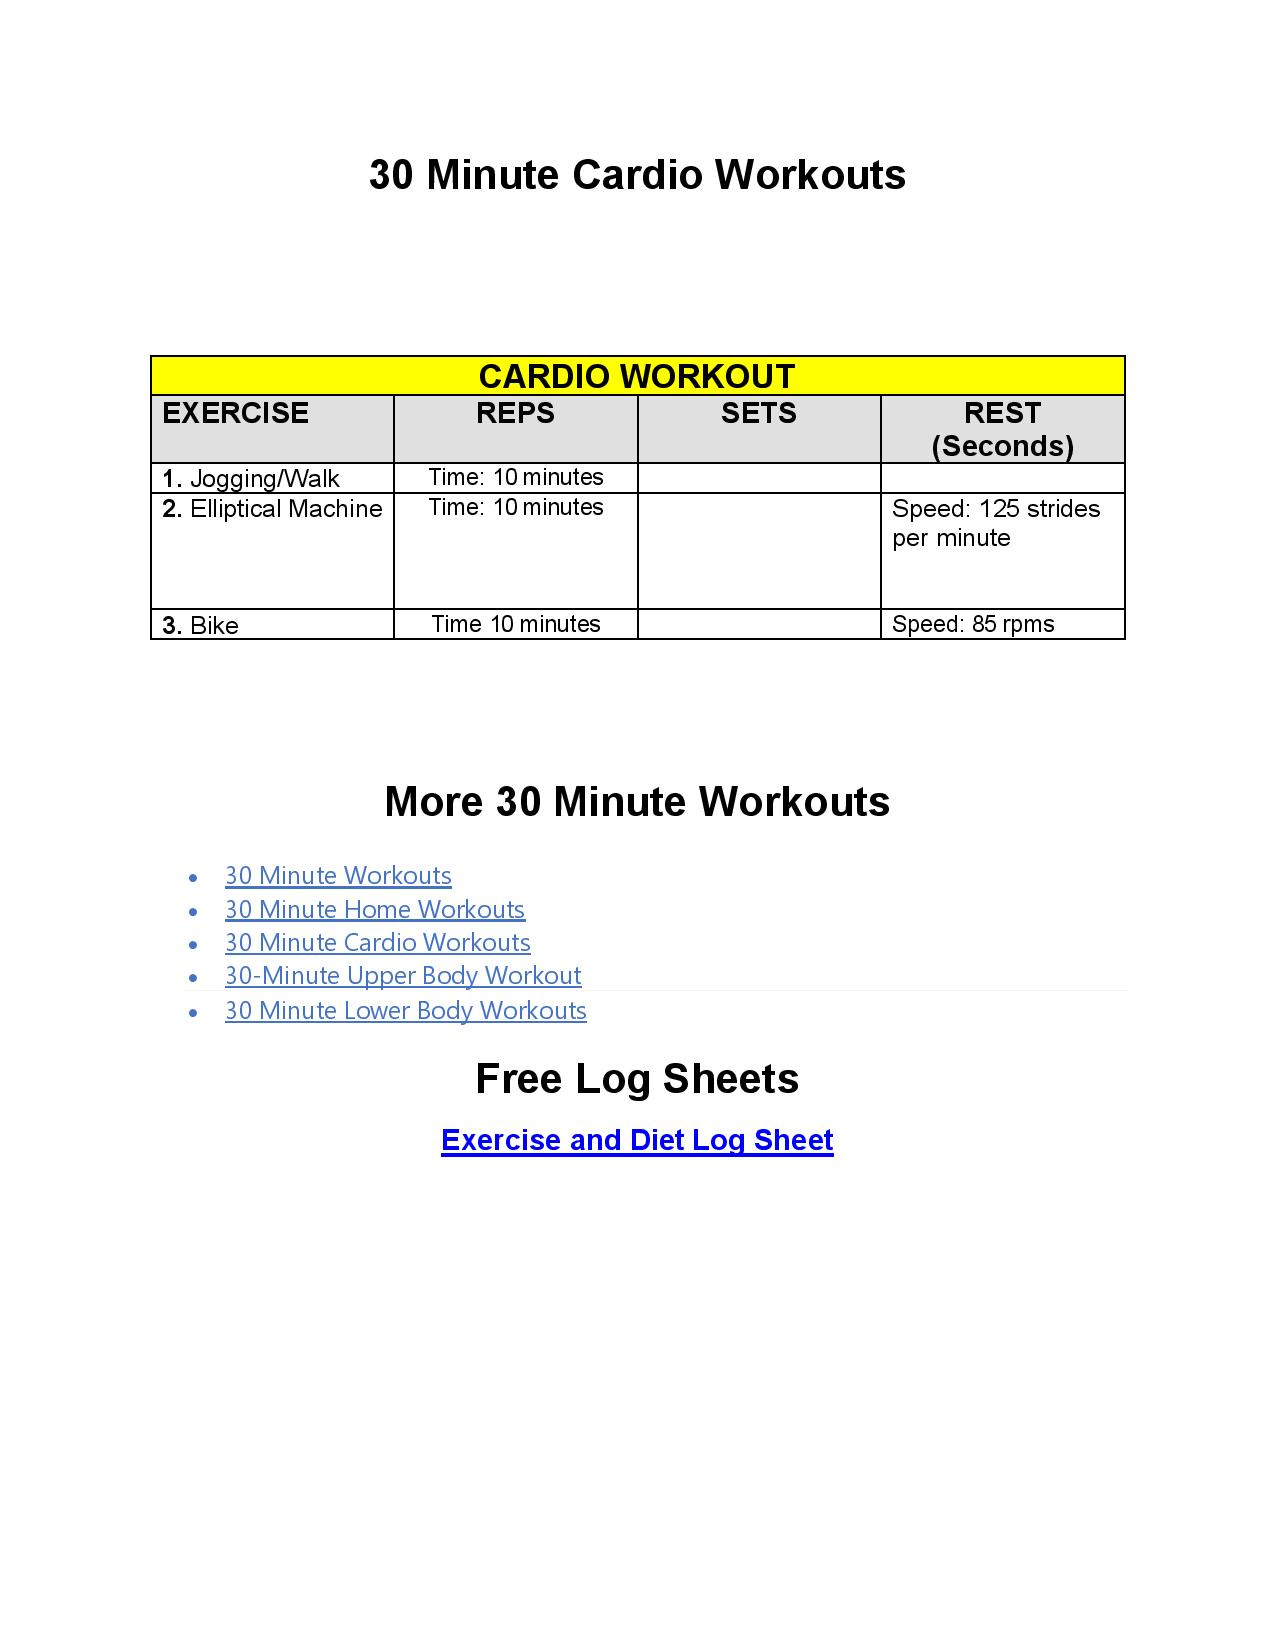 30 minute sample cardio workout to lose weight pdf. 